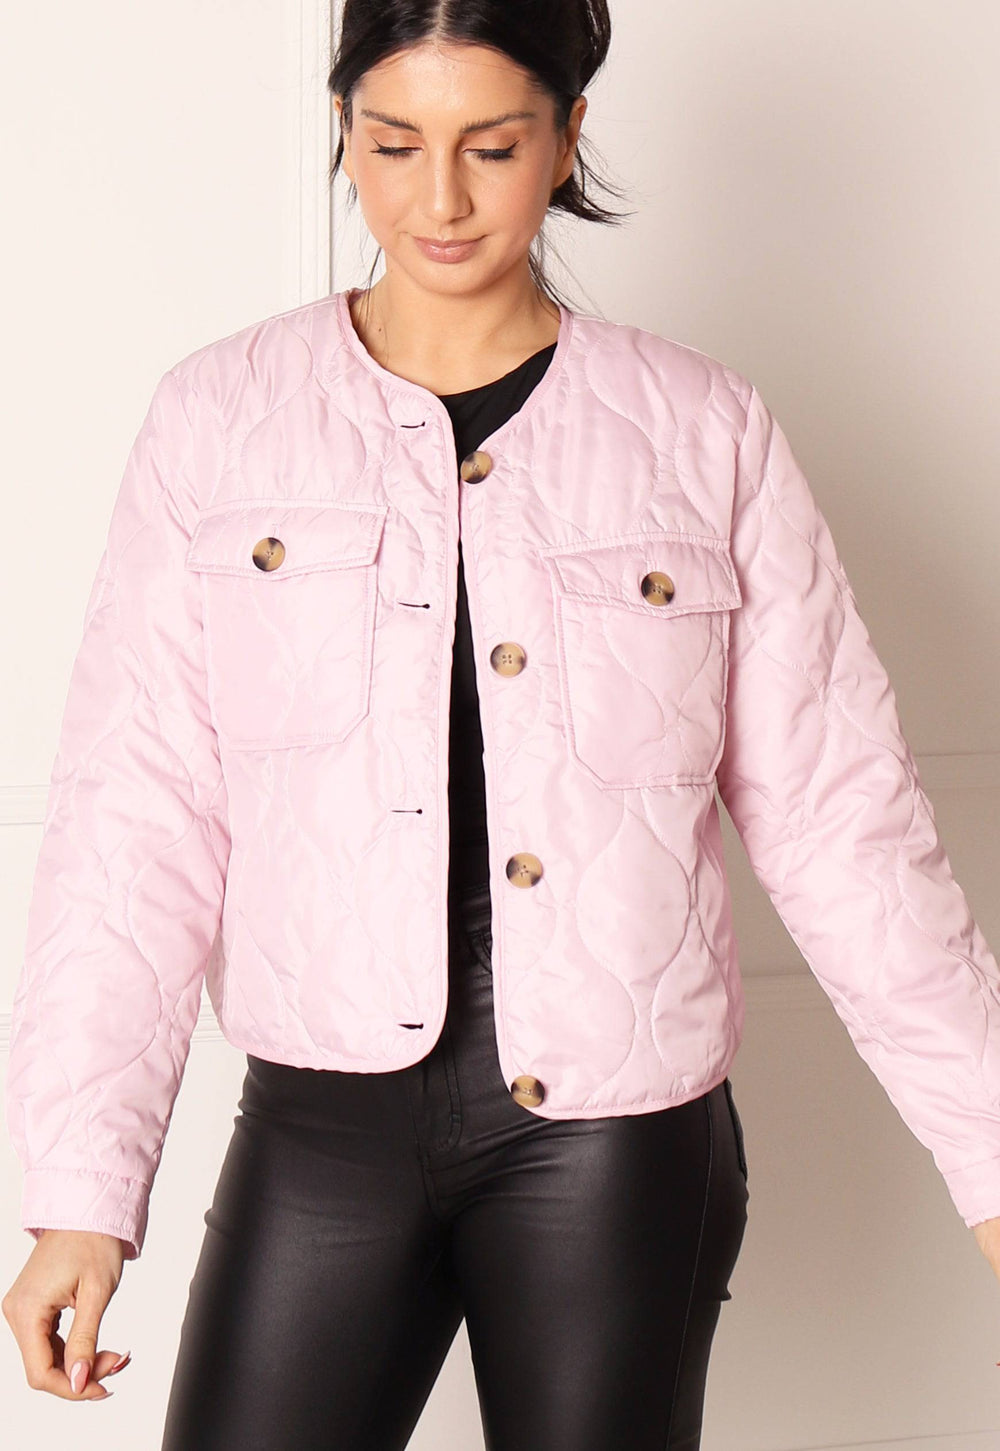 VERO MODA Nella Quilted Short in Light Pink | One Nation Clothing VERO MODA Nella Quilted Short Jacket in Light Pink